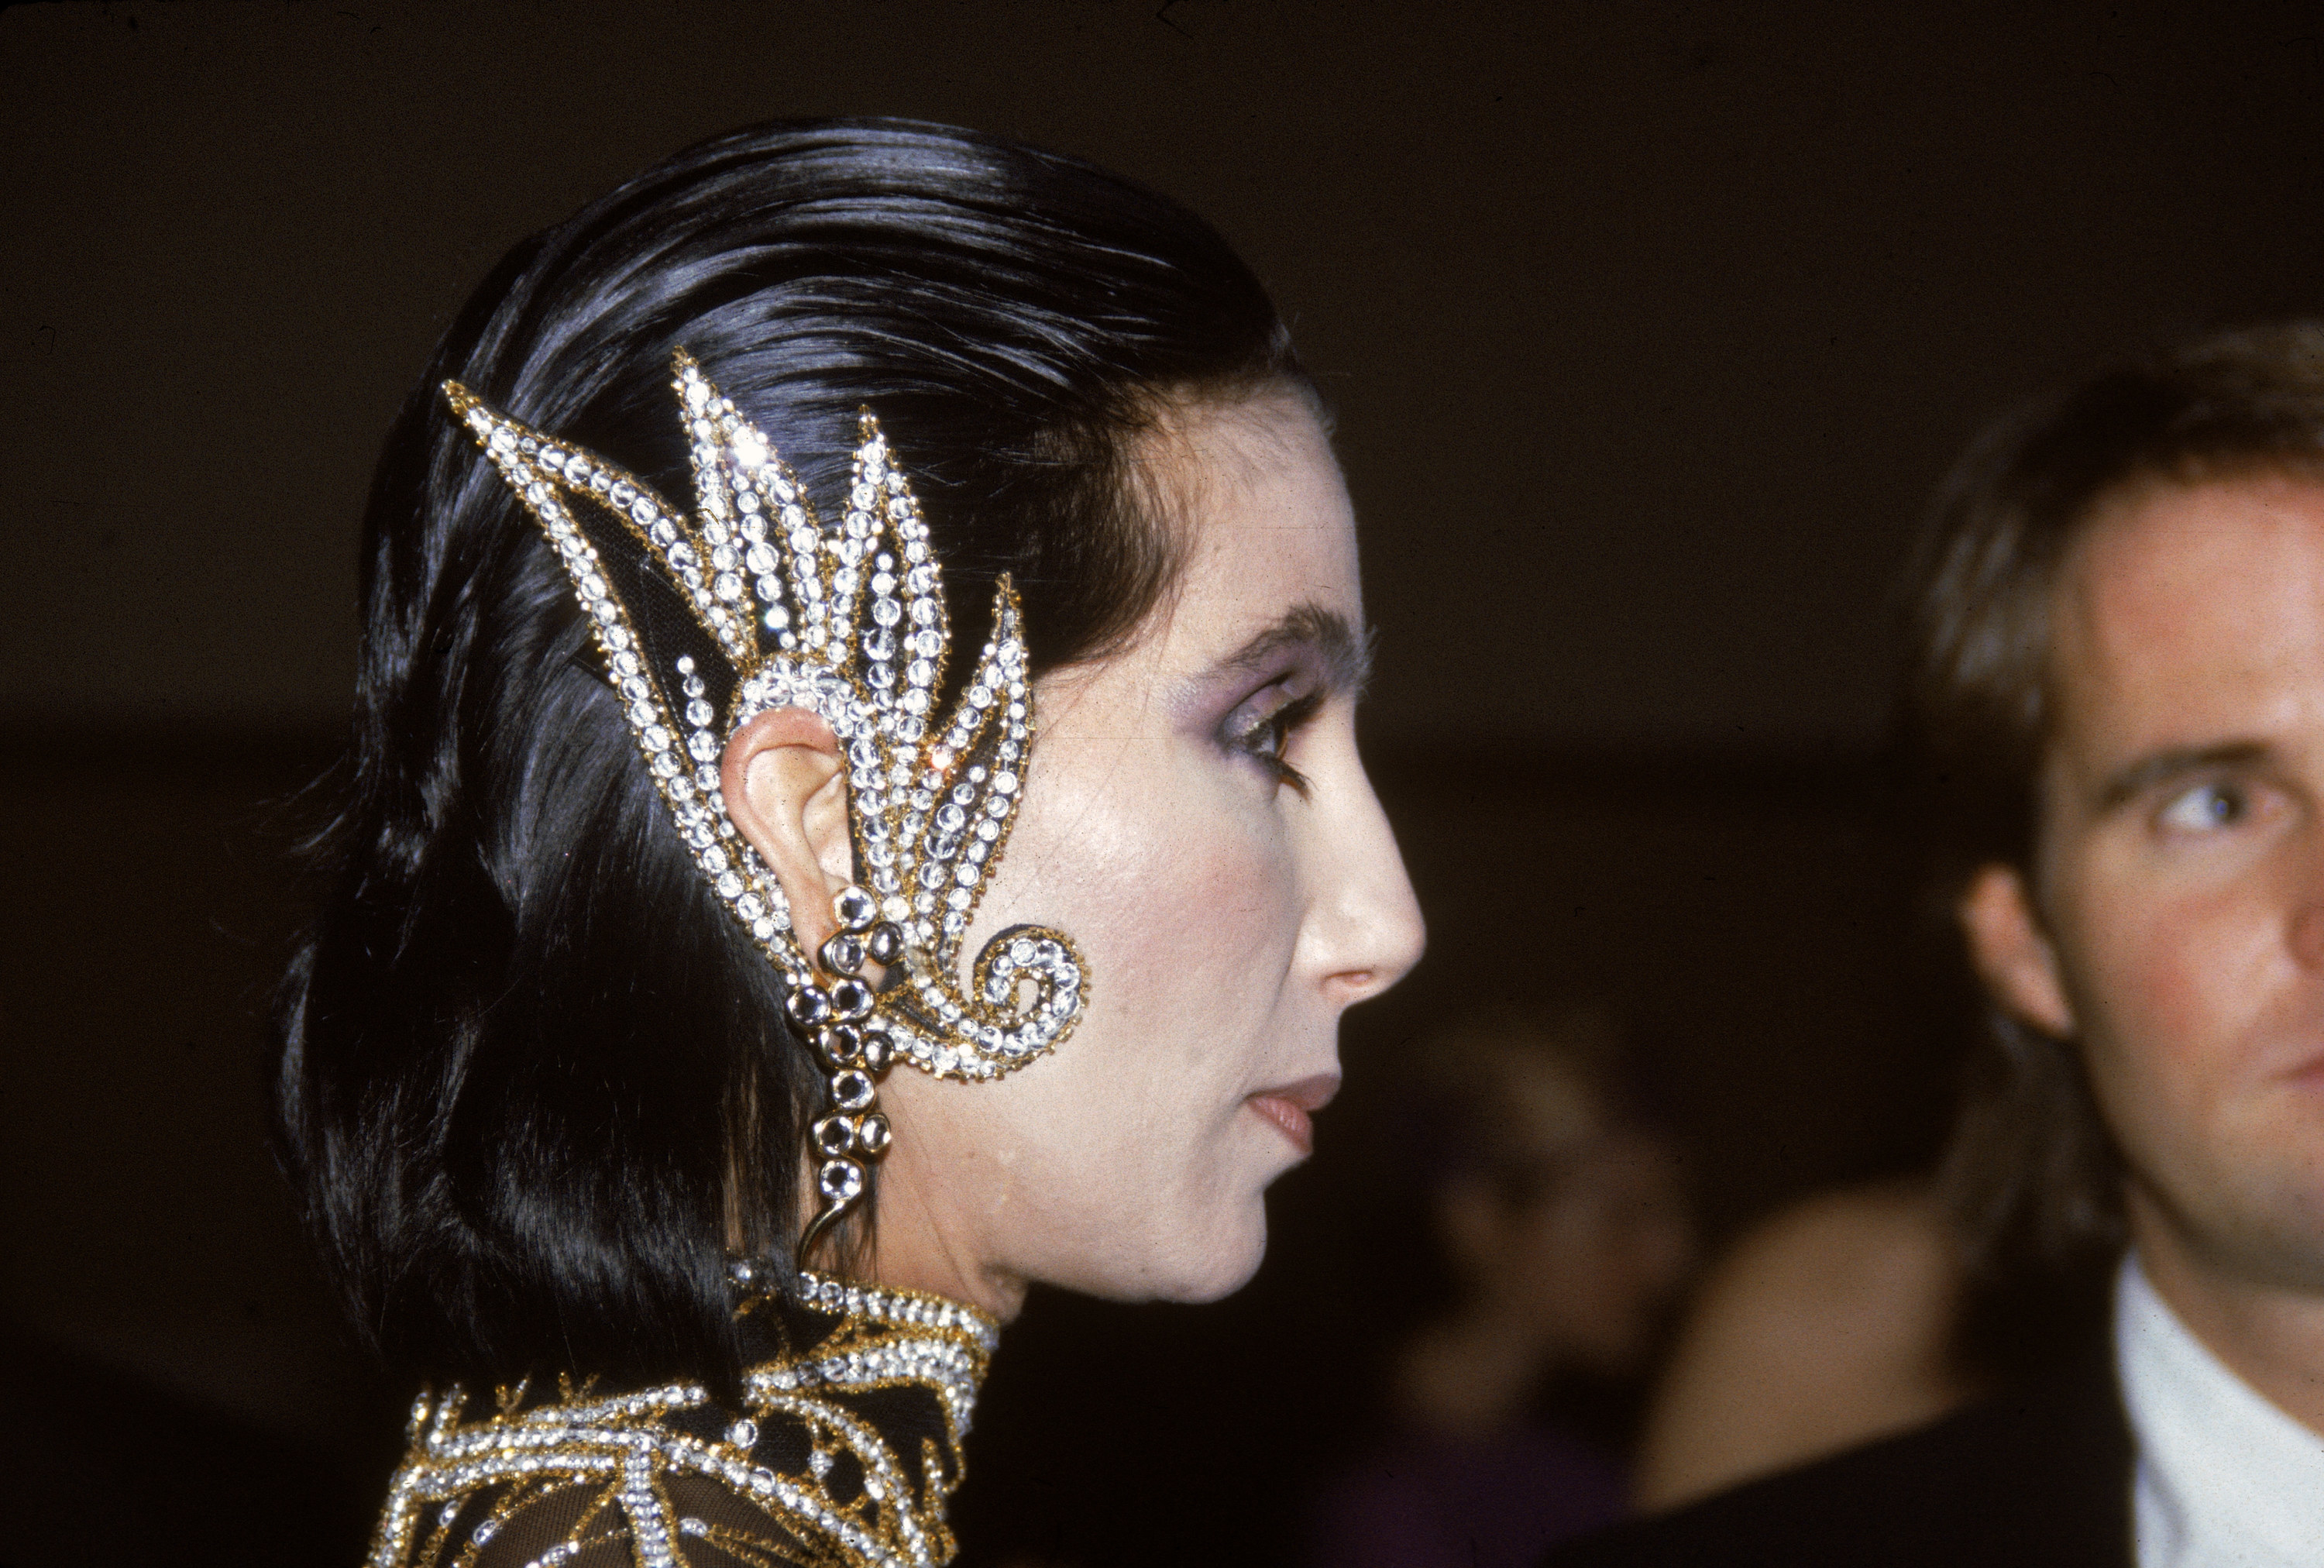 Side profile shot of Cher wearing the ear cuffs, which look like wings and are studded with glittering jewels